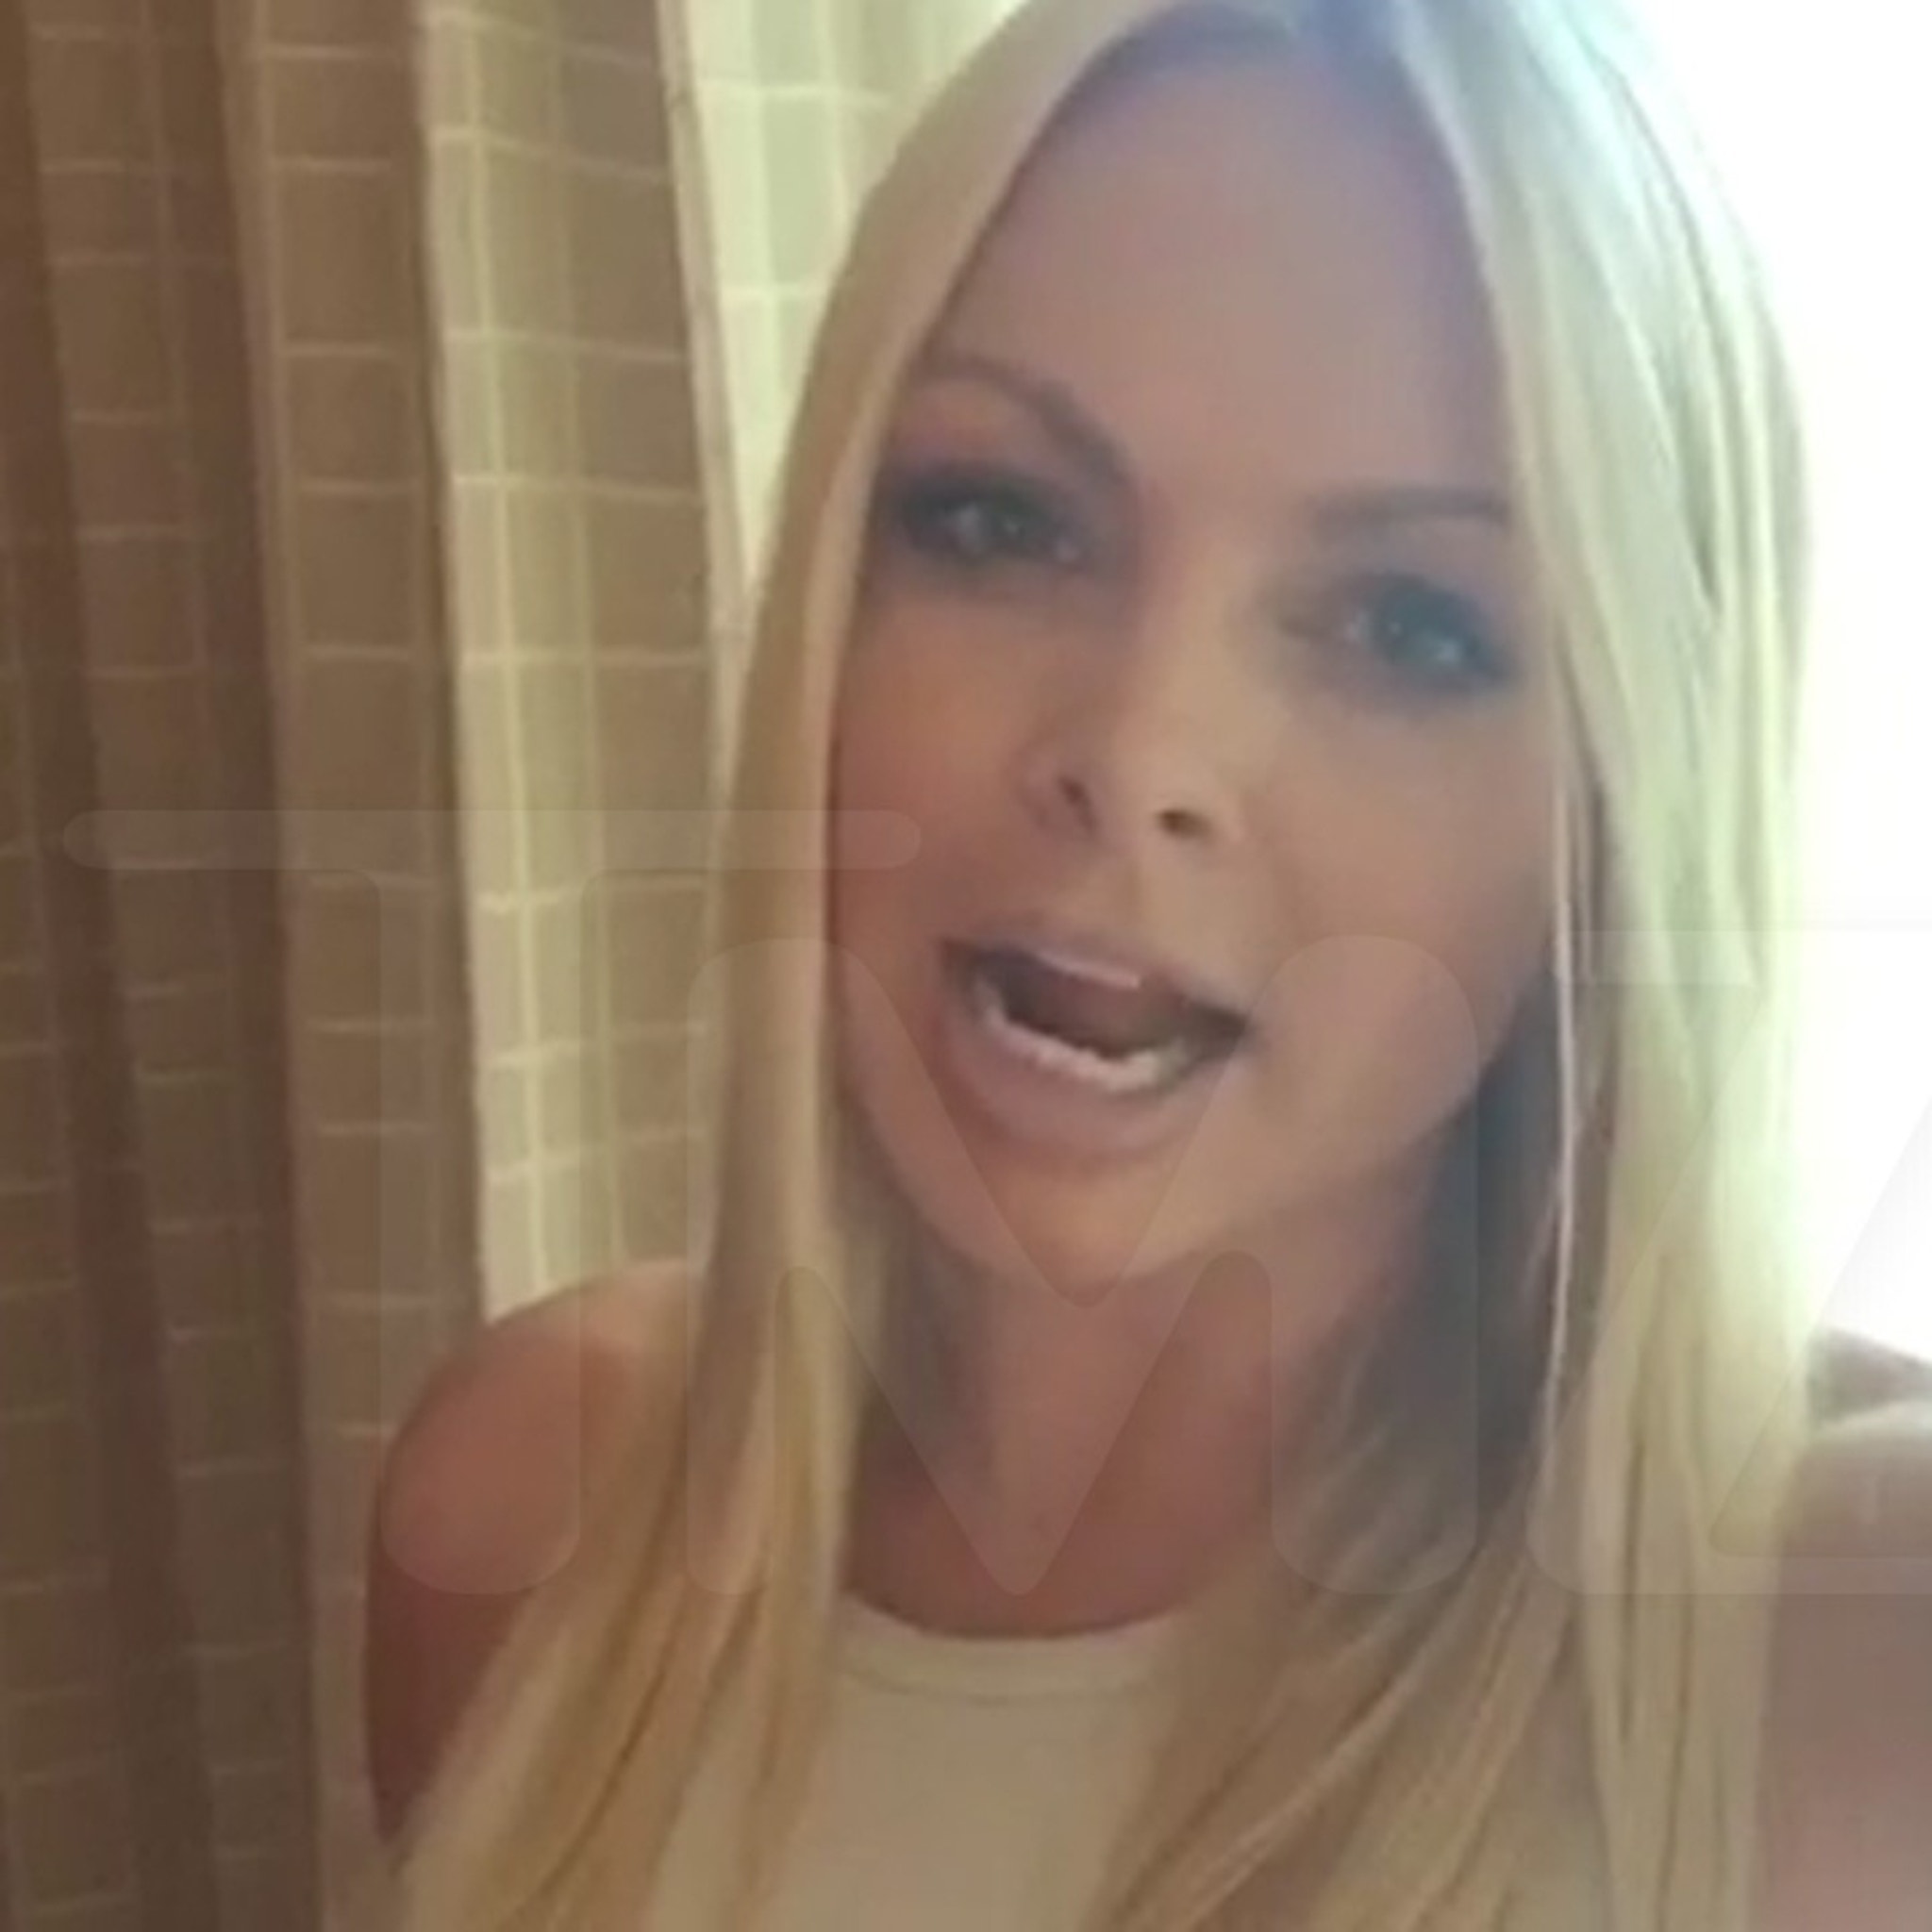 X Hd Video Rape - Porn Star Jesse Jane -- Lashes Out at Internet Haters Over 'Unconscious'  Video (VIDEO)